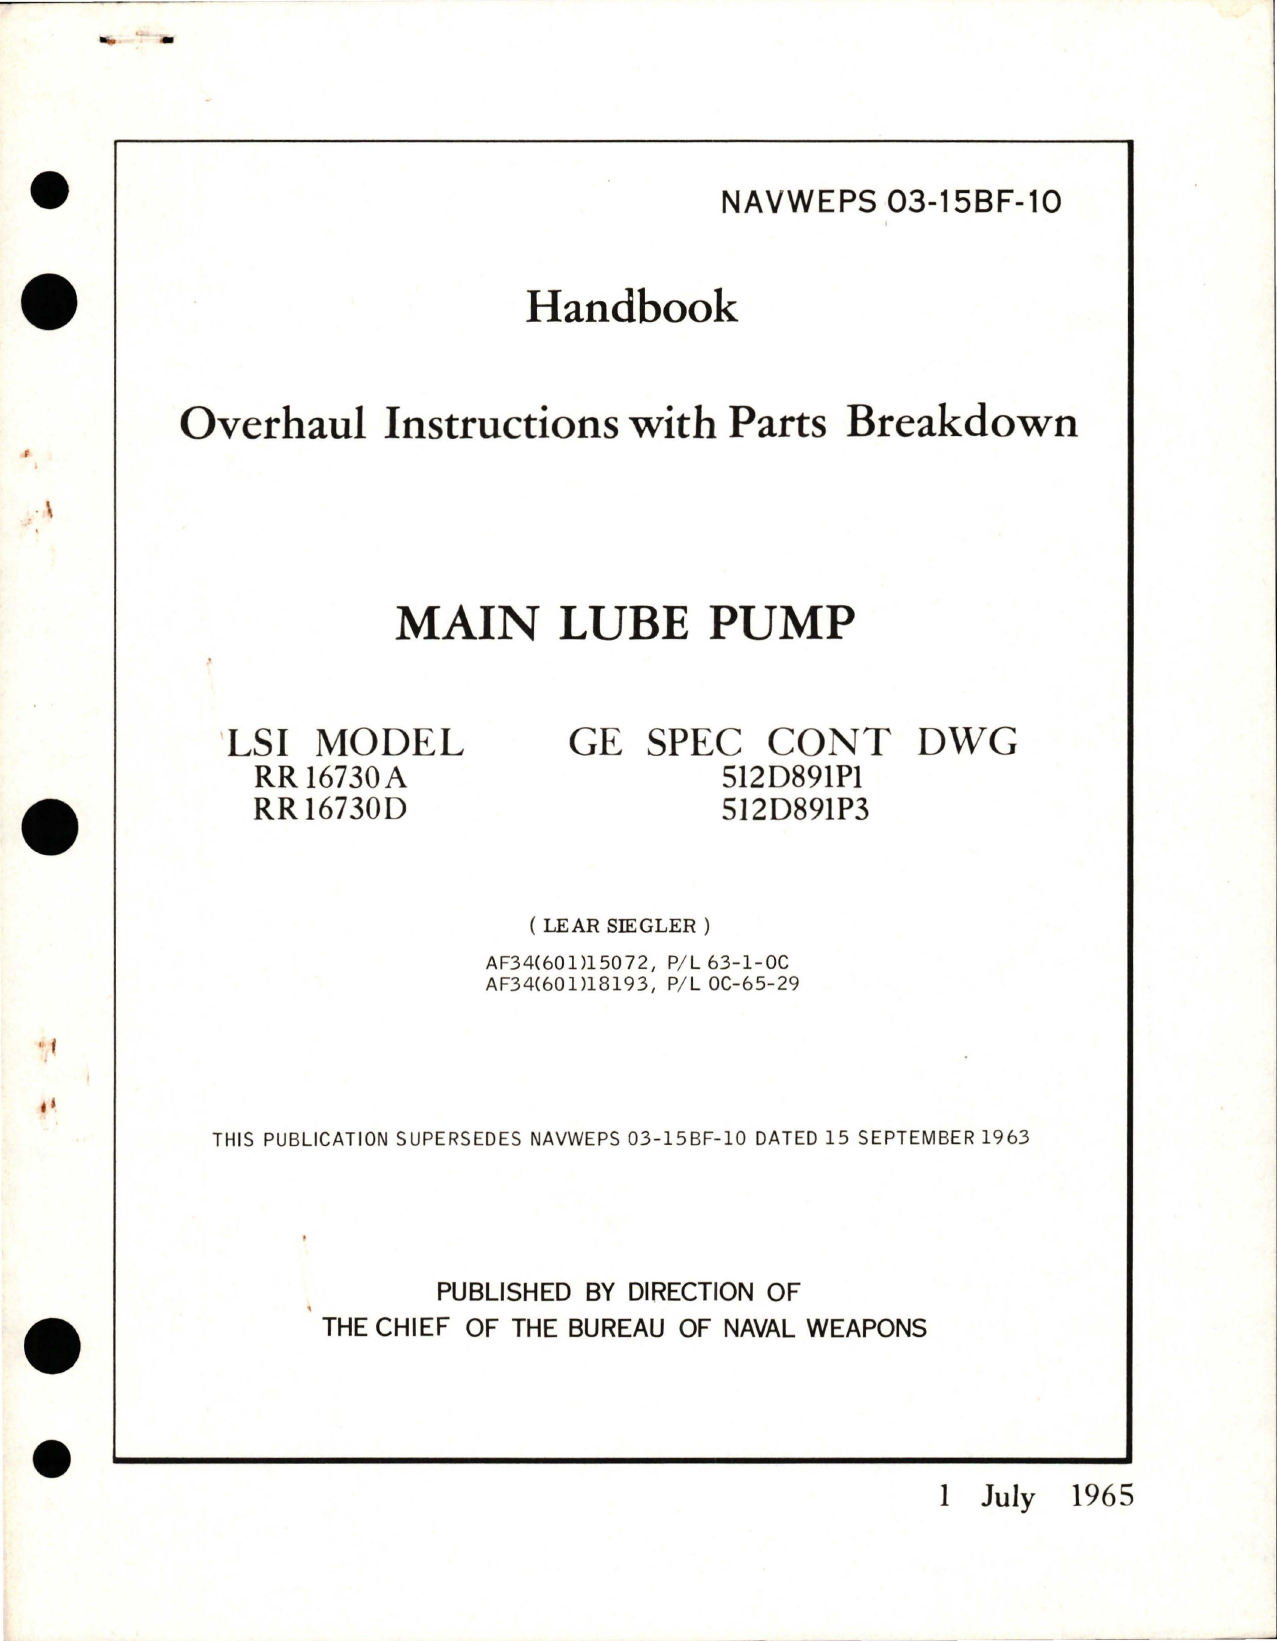 Sample page 1 from AirCorps Library document: Overhaul Instructions with Parts Breakdown for Main Lube Pump - LSI Model RR16730A and RR16730D